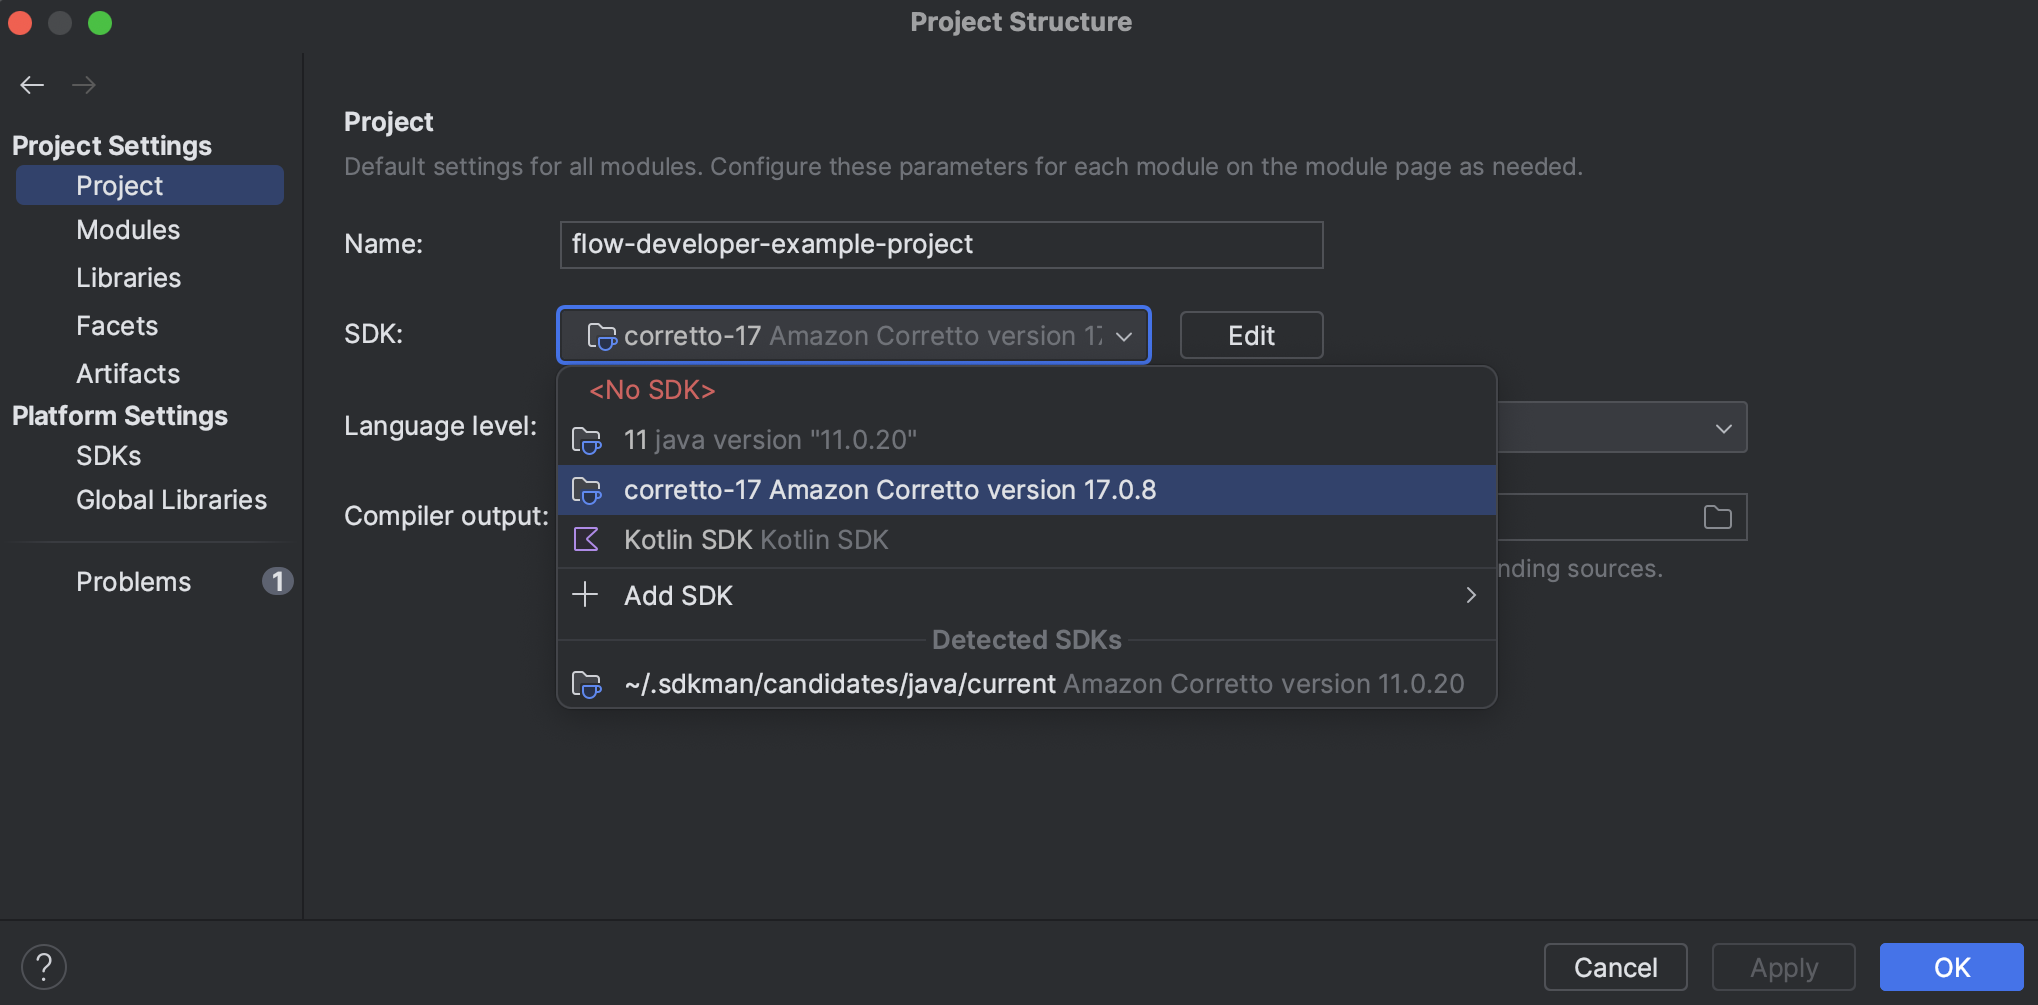 The Project Structure window displays a Project SDK dropdown with Java 17 selected.